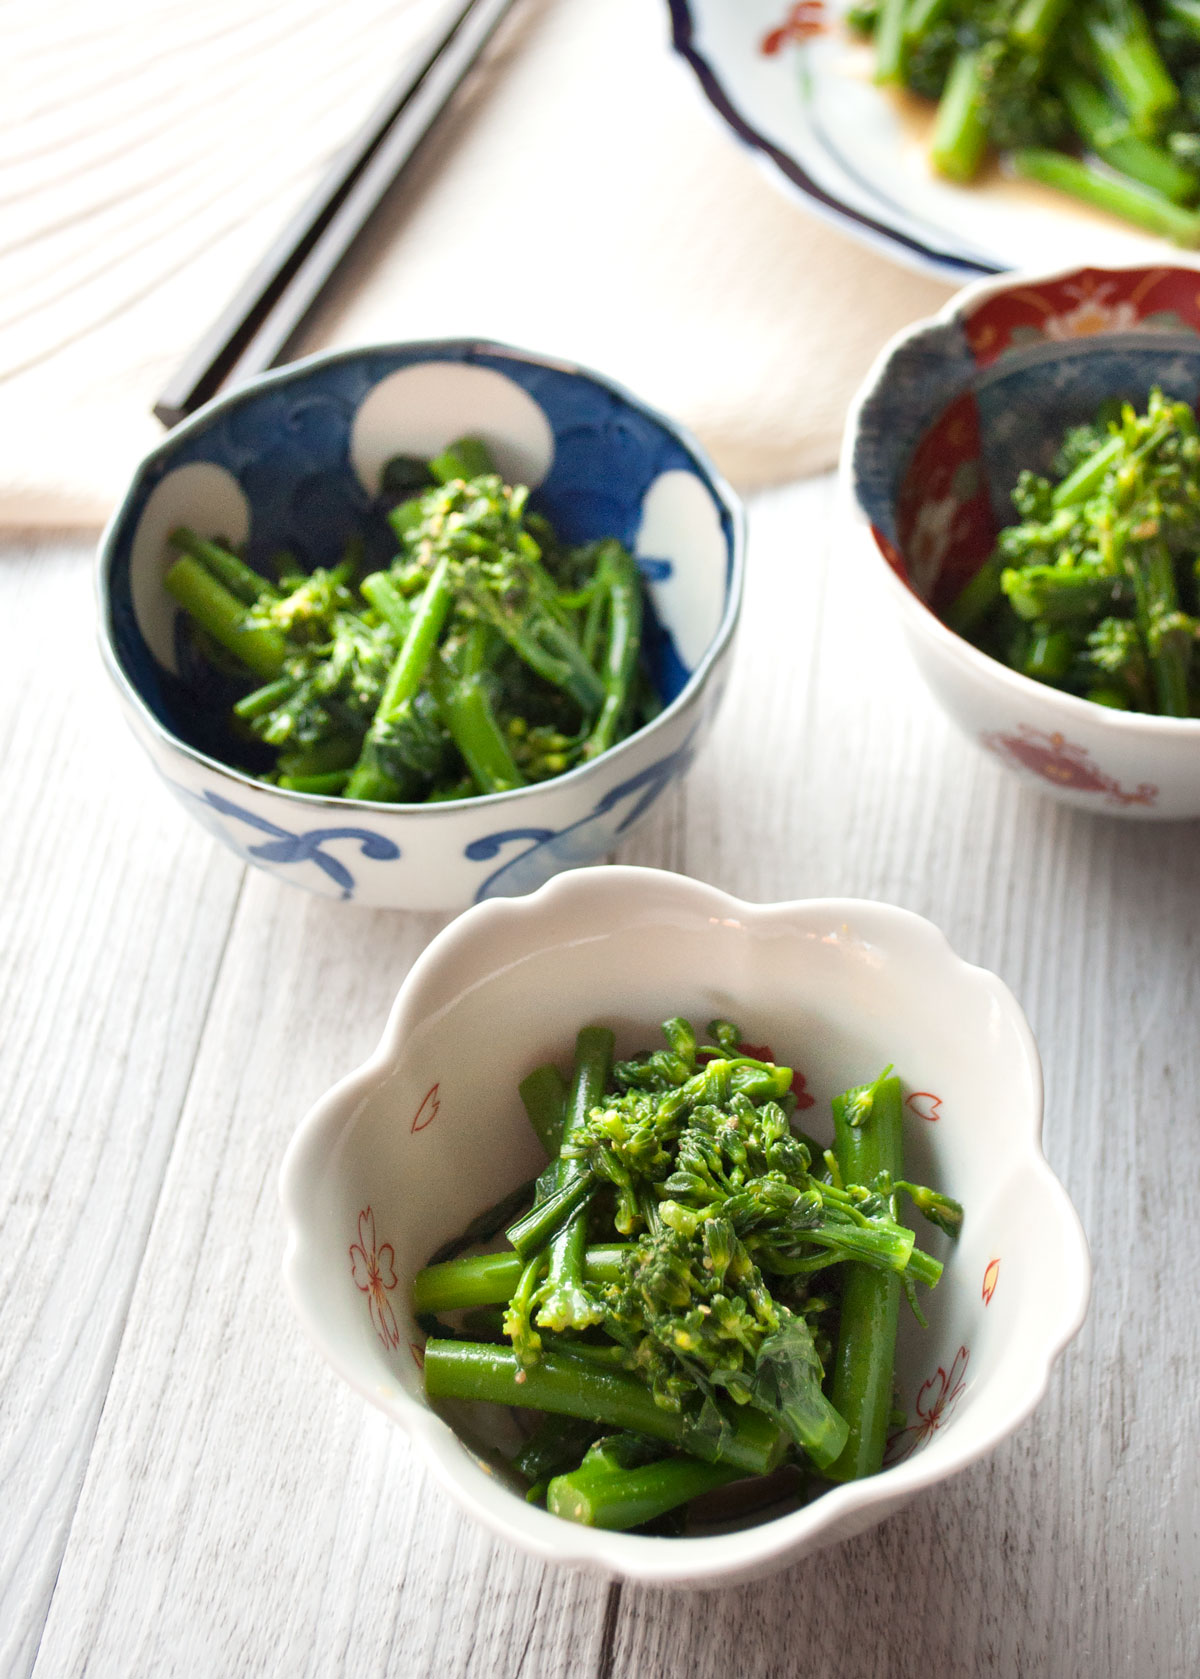 Karashiae dressing is a Japanese mustard dressing which is made with mustard, soy sauce and dashi stock. It has a kick of hot mustard but is quite light as it does not use oil at all unlike most Western salad dressings. I used broccolini today but you can use other vegetables.